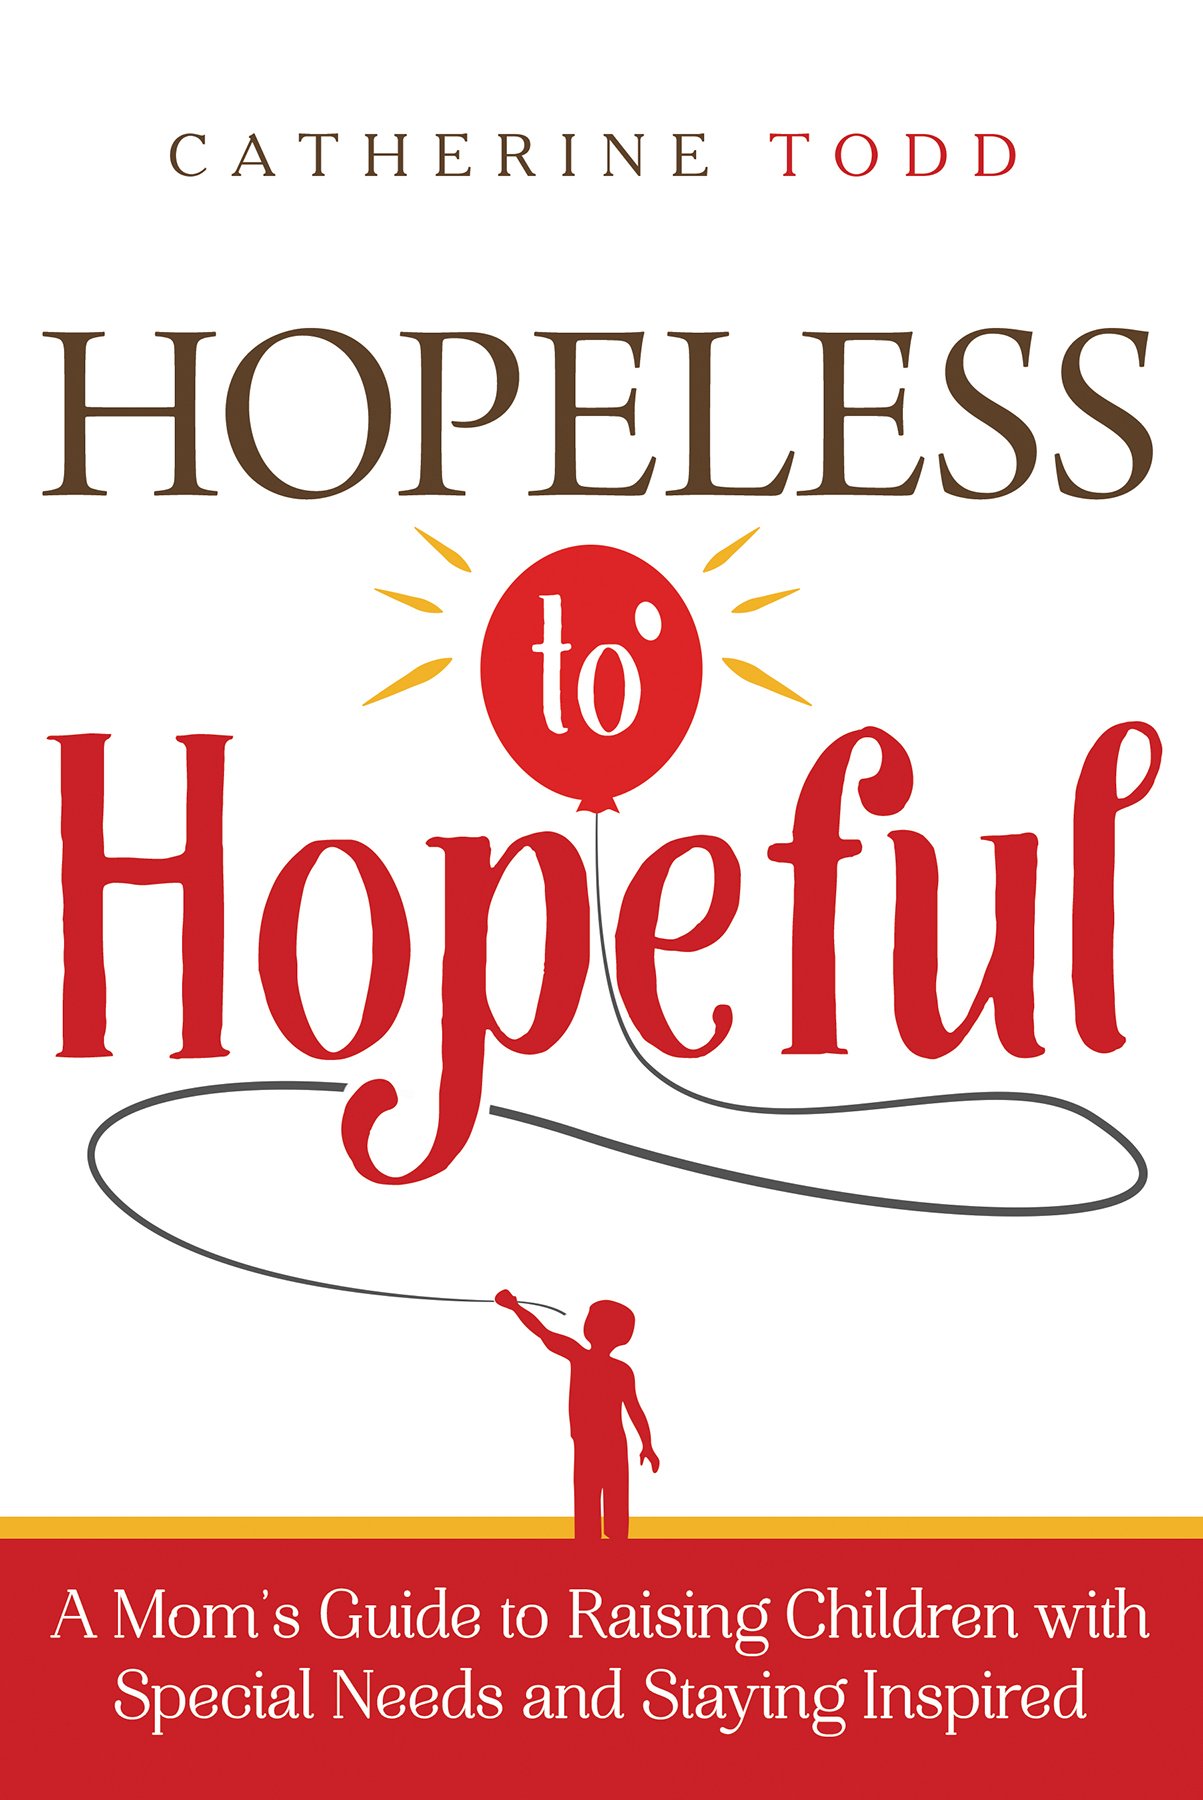 Hopeless to Hopeful is a mother&rsquo;s inspirational tr'